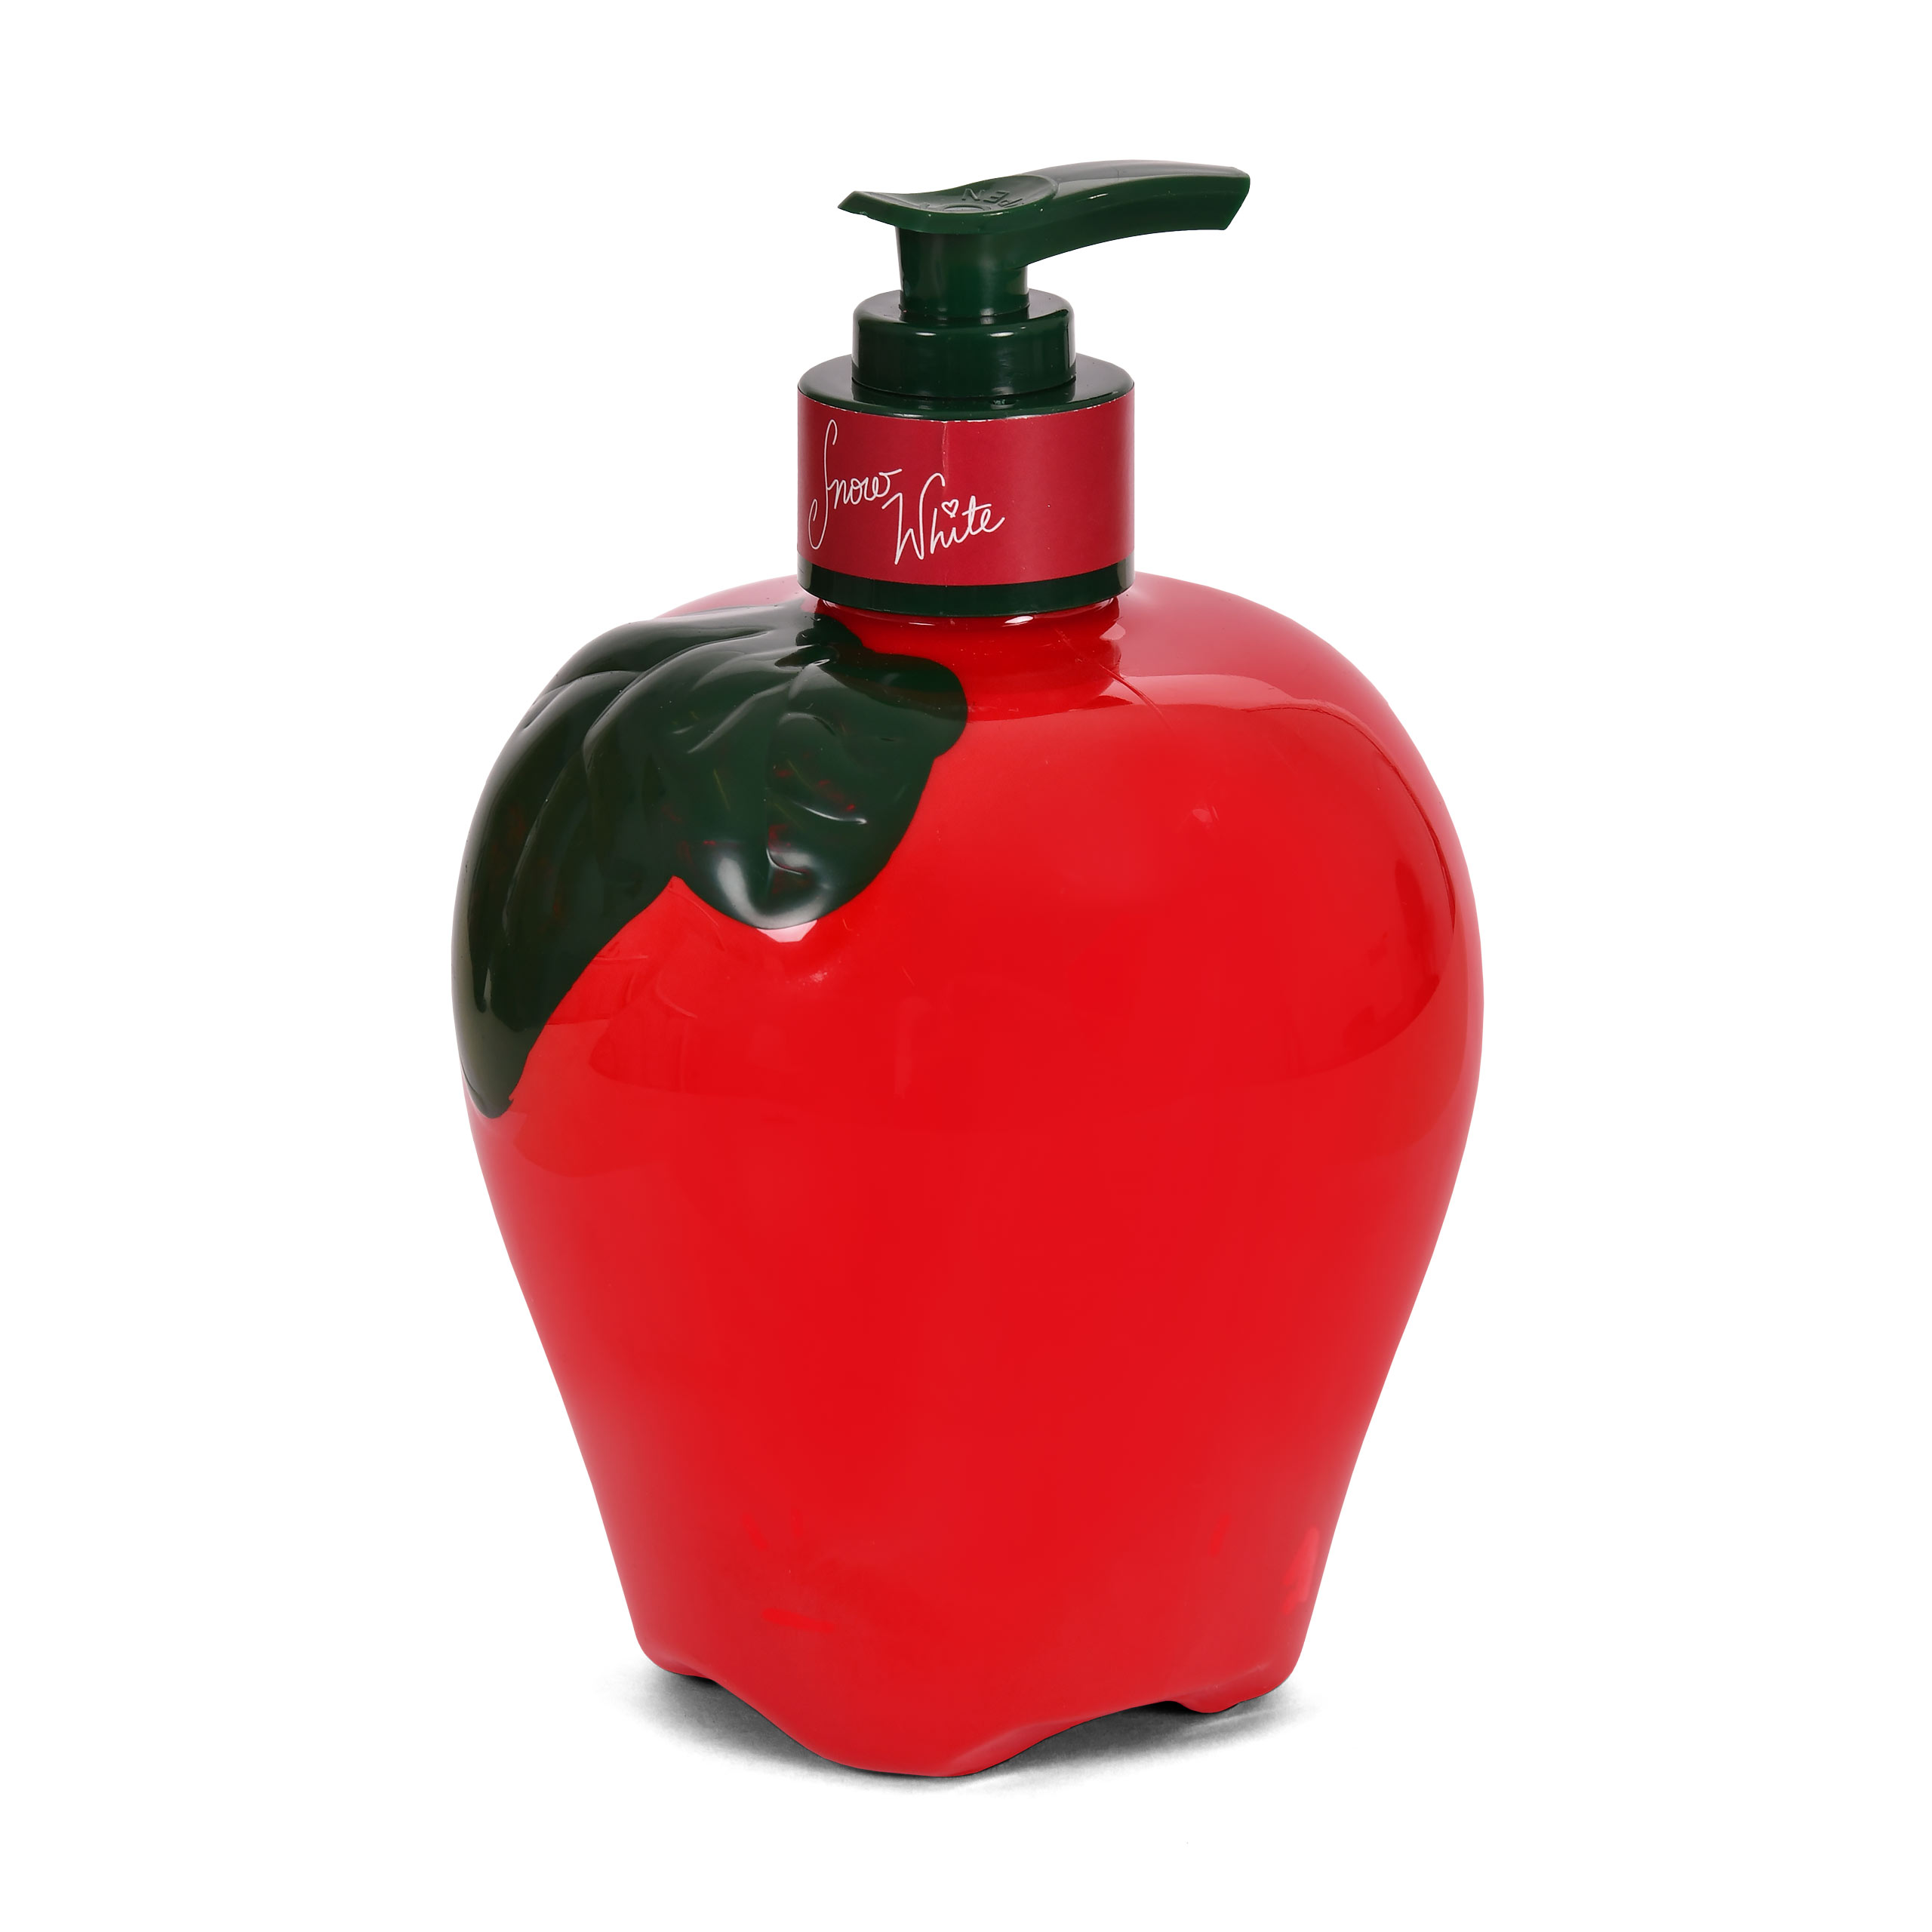 Snow White - Apple Soap Dispenser with Wash Gel